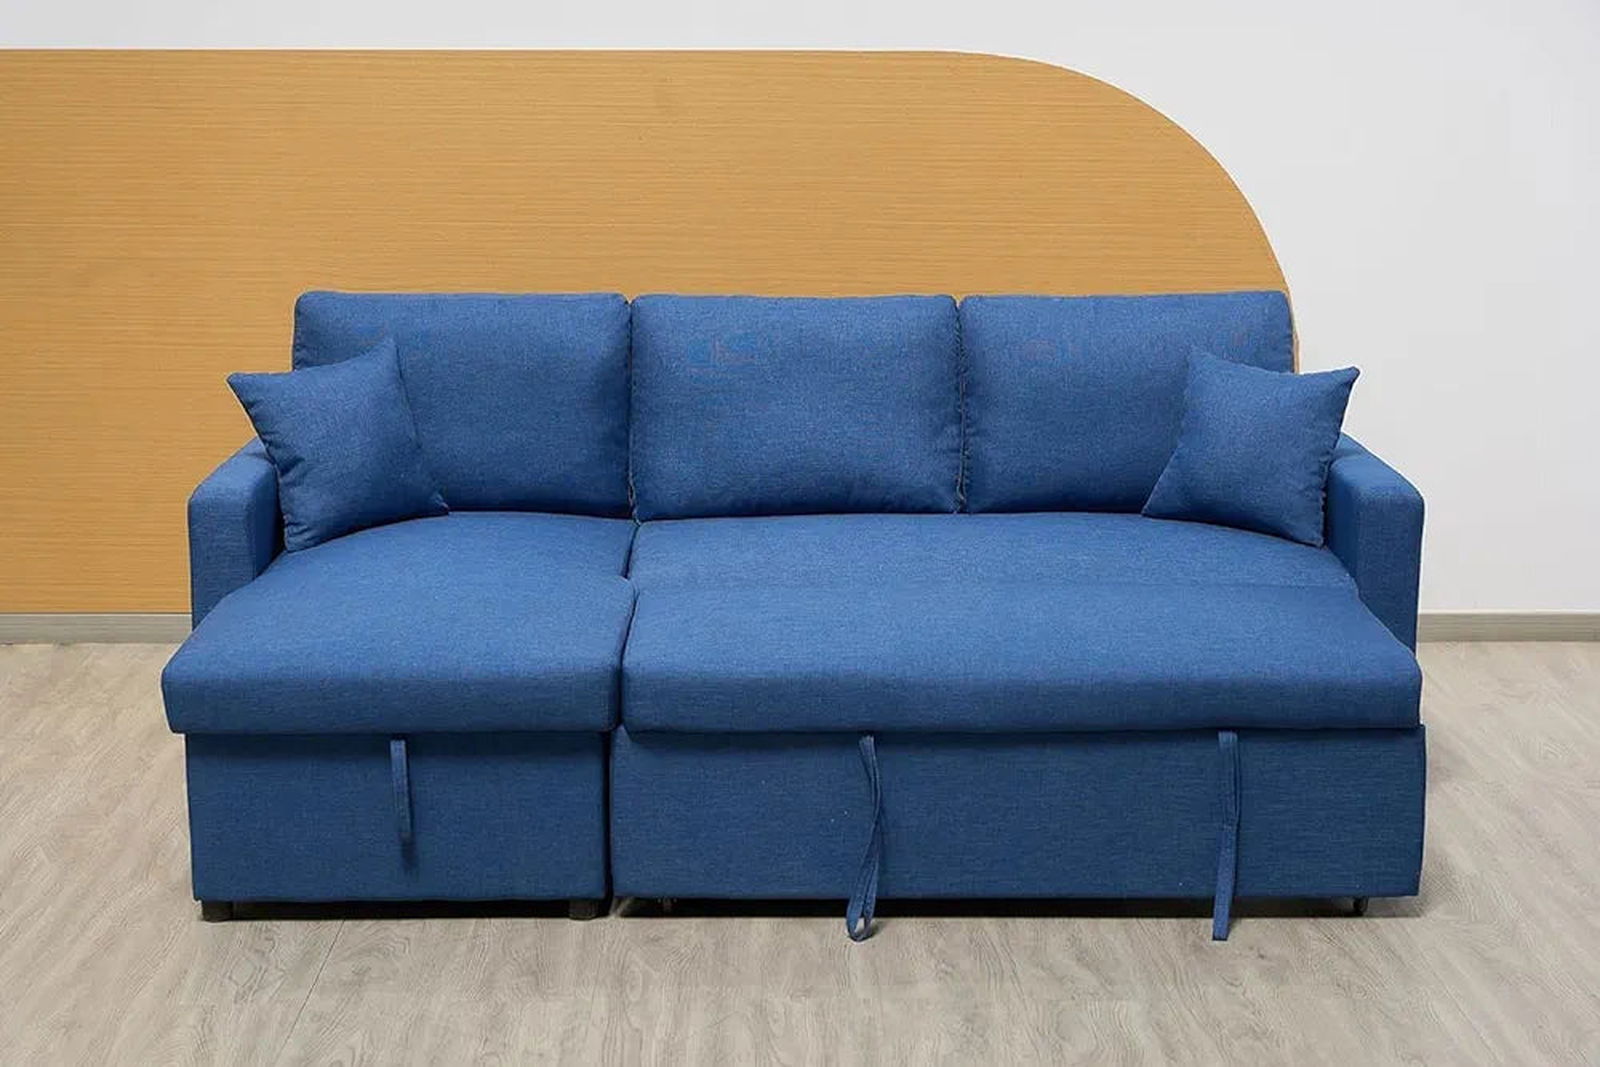 Deep Sleeping Sofa Bed with L-Shaped Cushions | Storage space | Convertible living room furniture (blue)